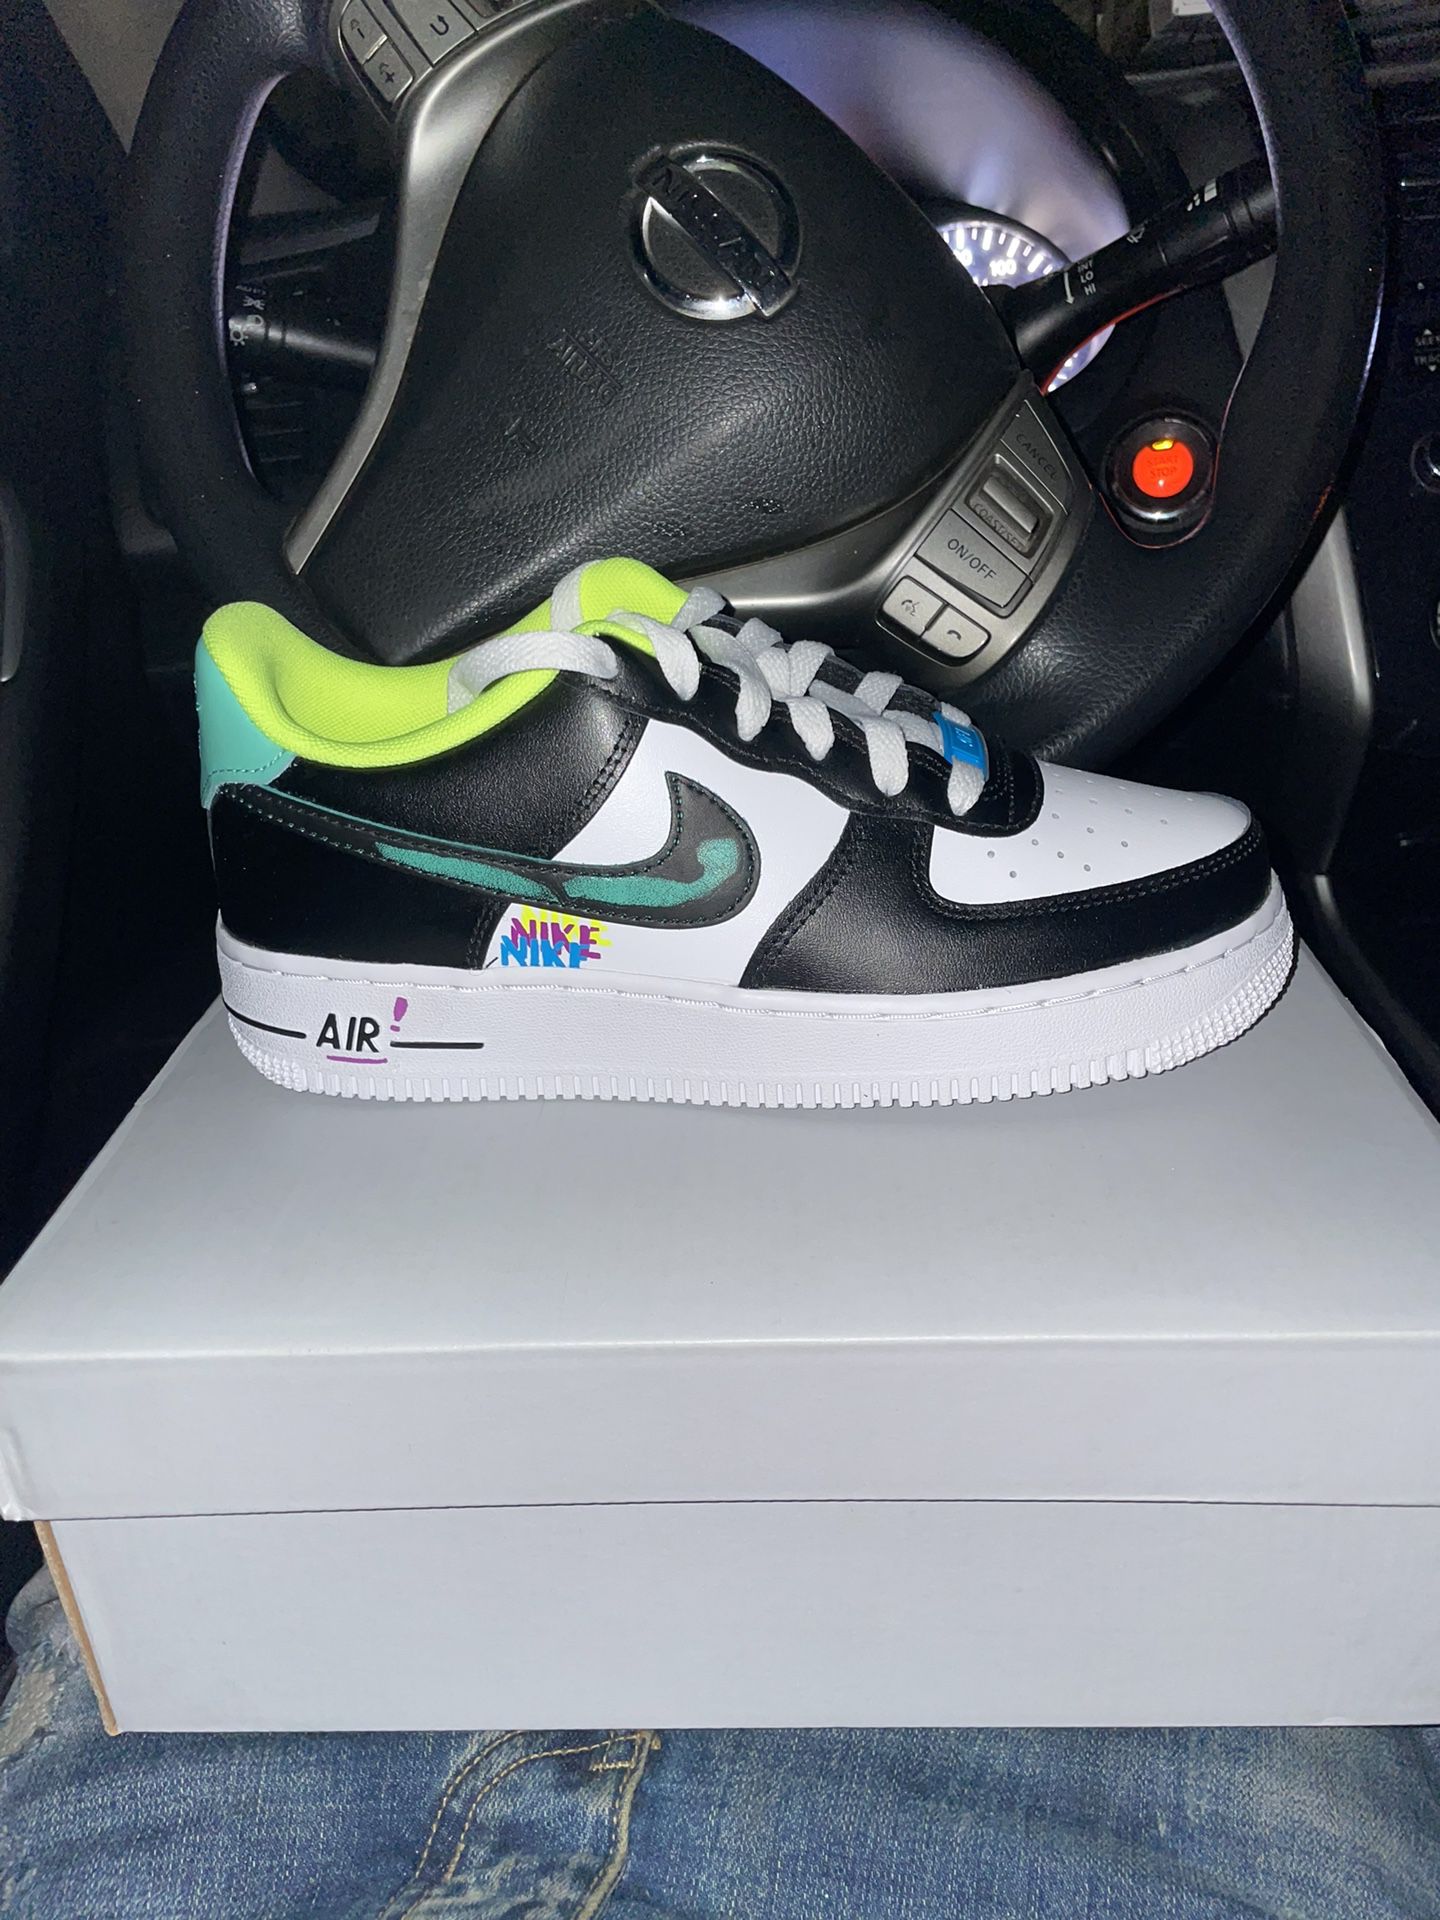 Brand New Nike Air Force 1 Size 5.5y for Sale in Las Vegas, NV